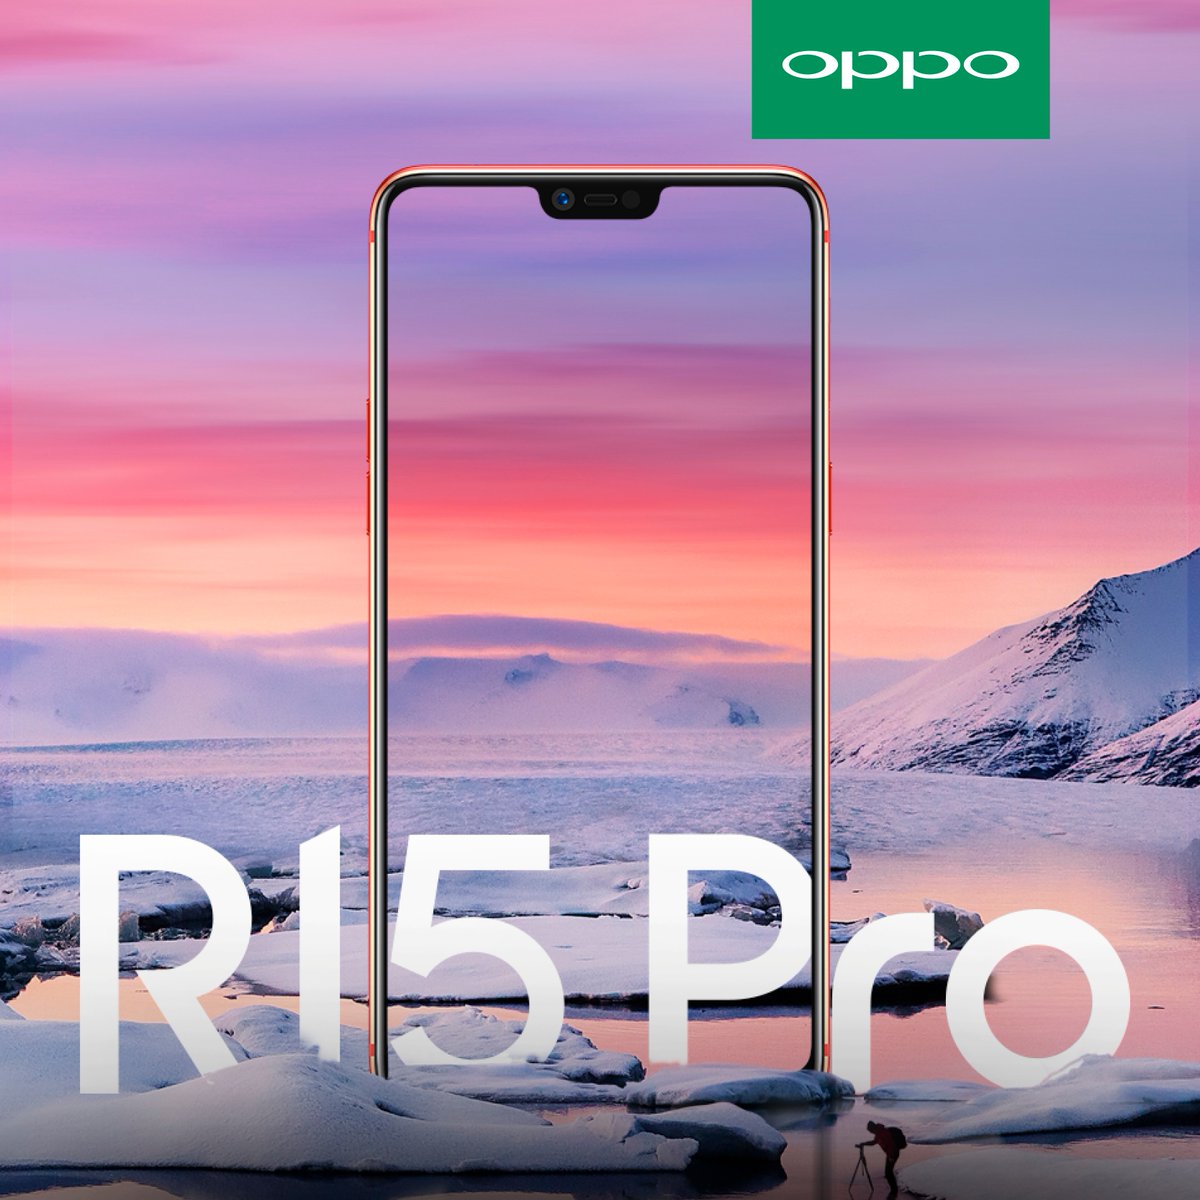 Oppo R15 Pro launched in India with 19:9 display and dual cameras ...